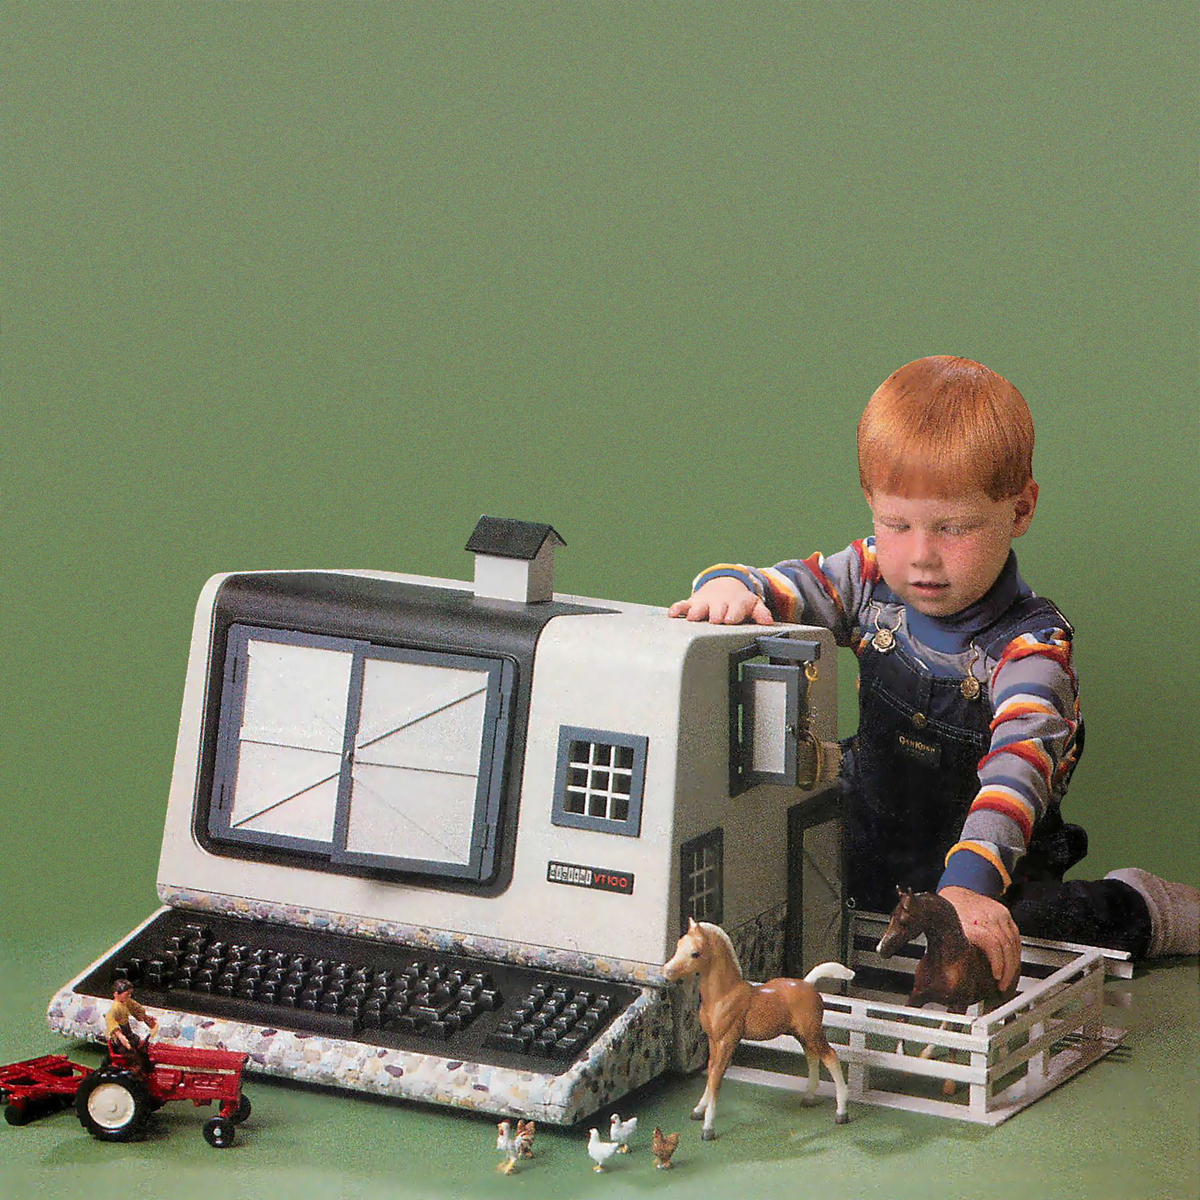 a toddler playing with toy horses in a toy barn that looks like a computer